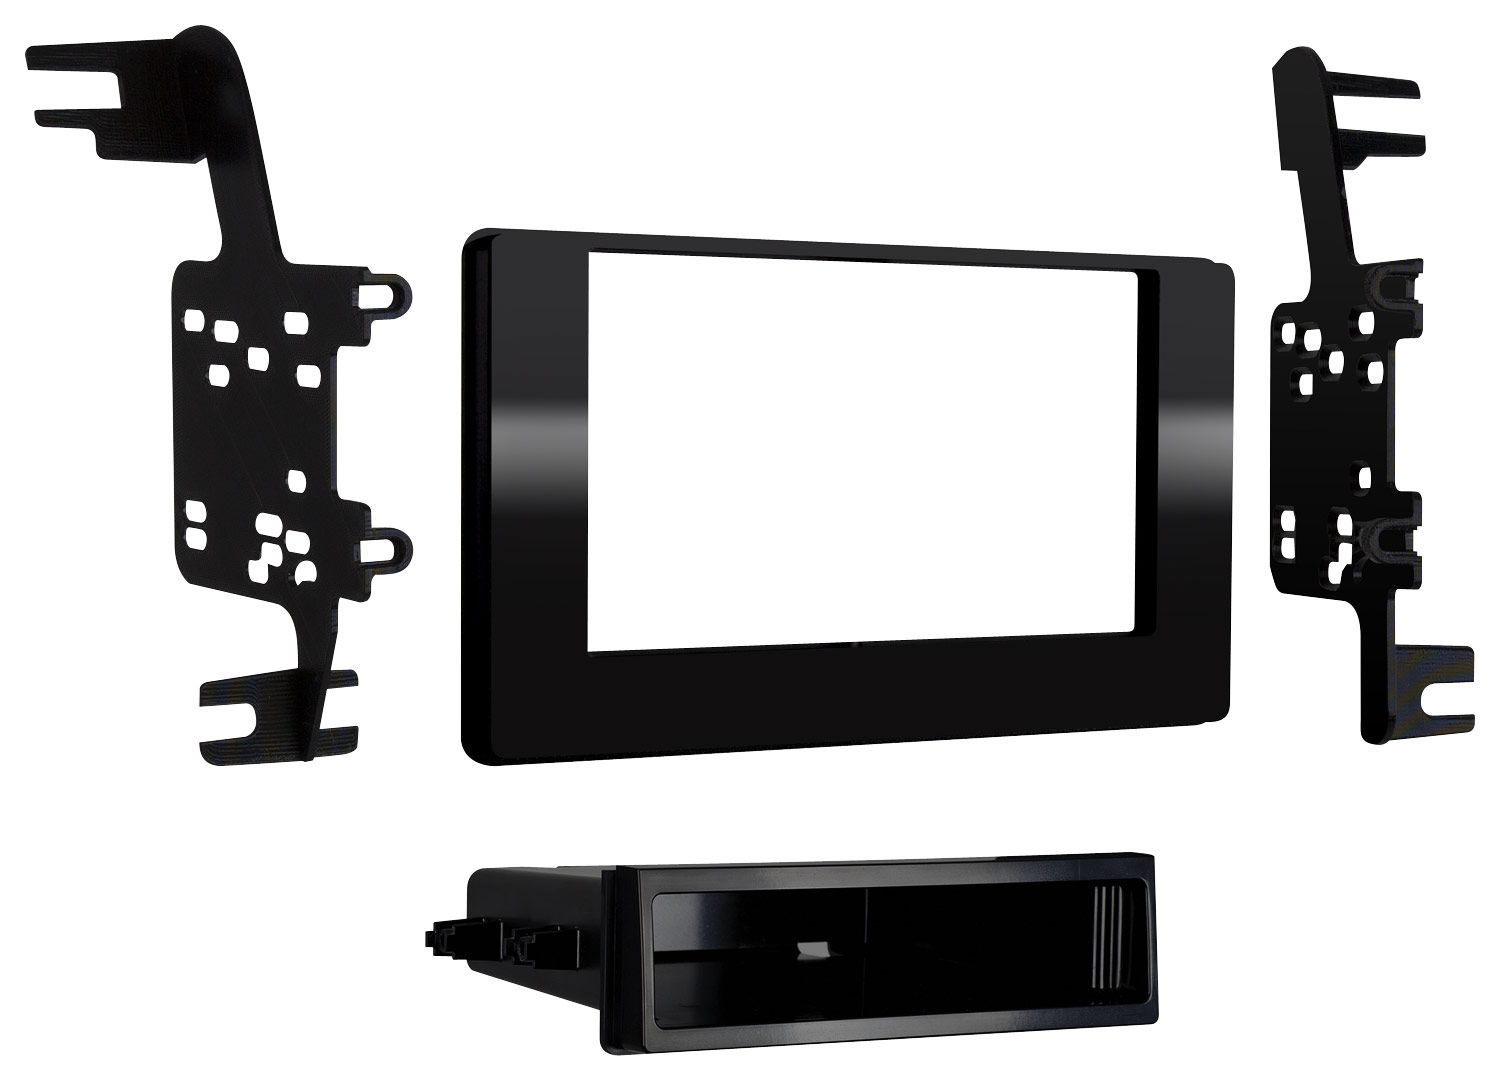 Metra - Dash Kit for 2015 and later Toyota Sienna Vehicles - Black was $49.99 now $37.49 (25.0% off)